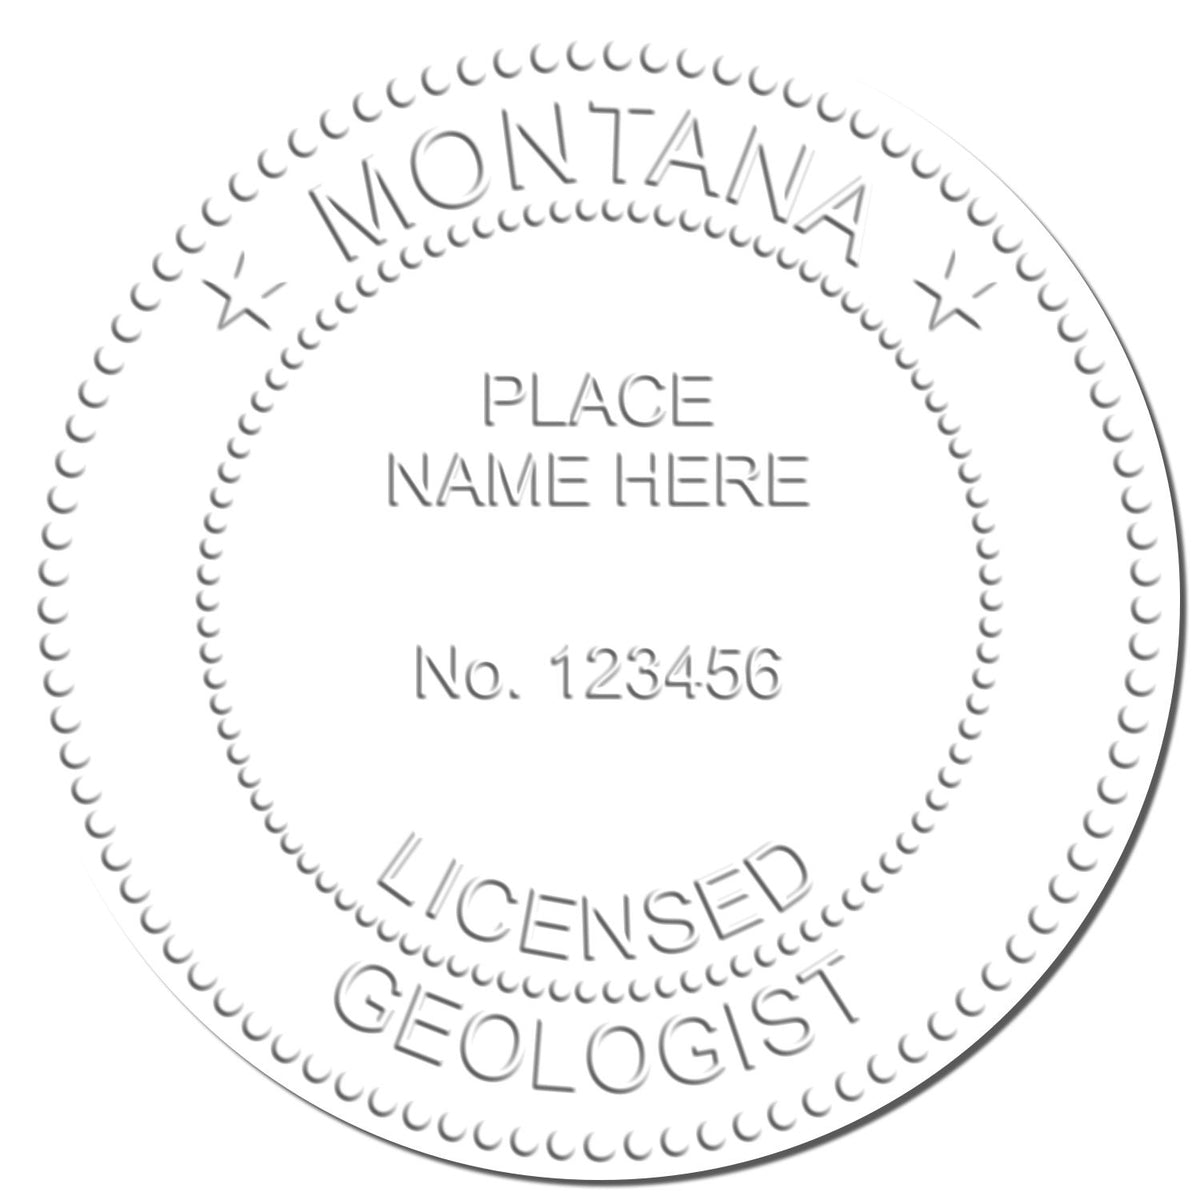 An in use photo of the Heavy Duty Cast Iron Montana Geologist Seal Embosser showing a sample imprint on a cardstock